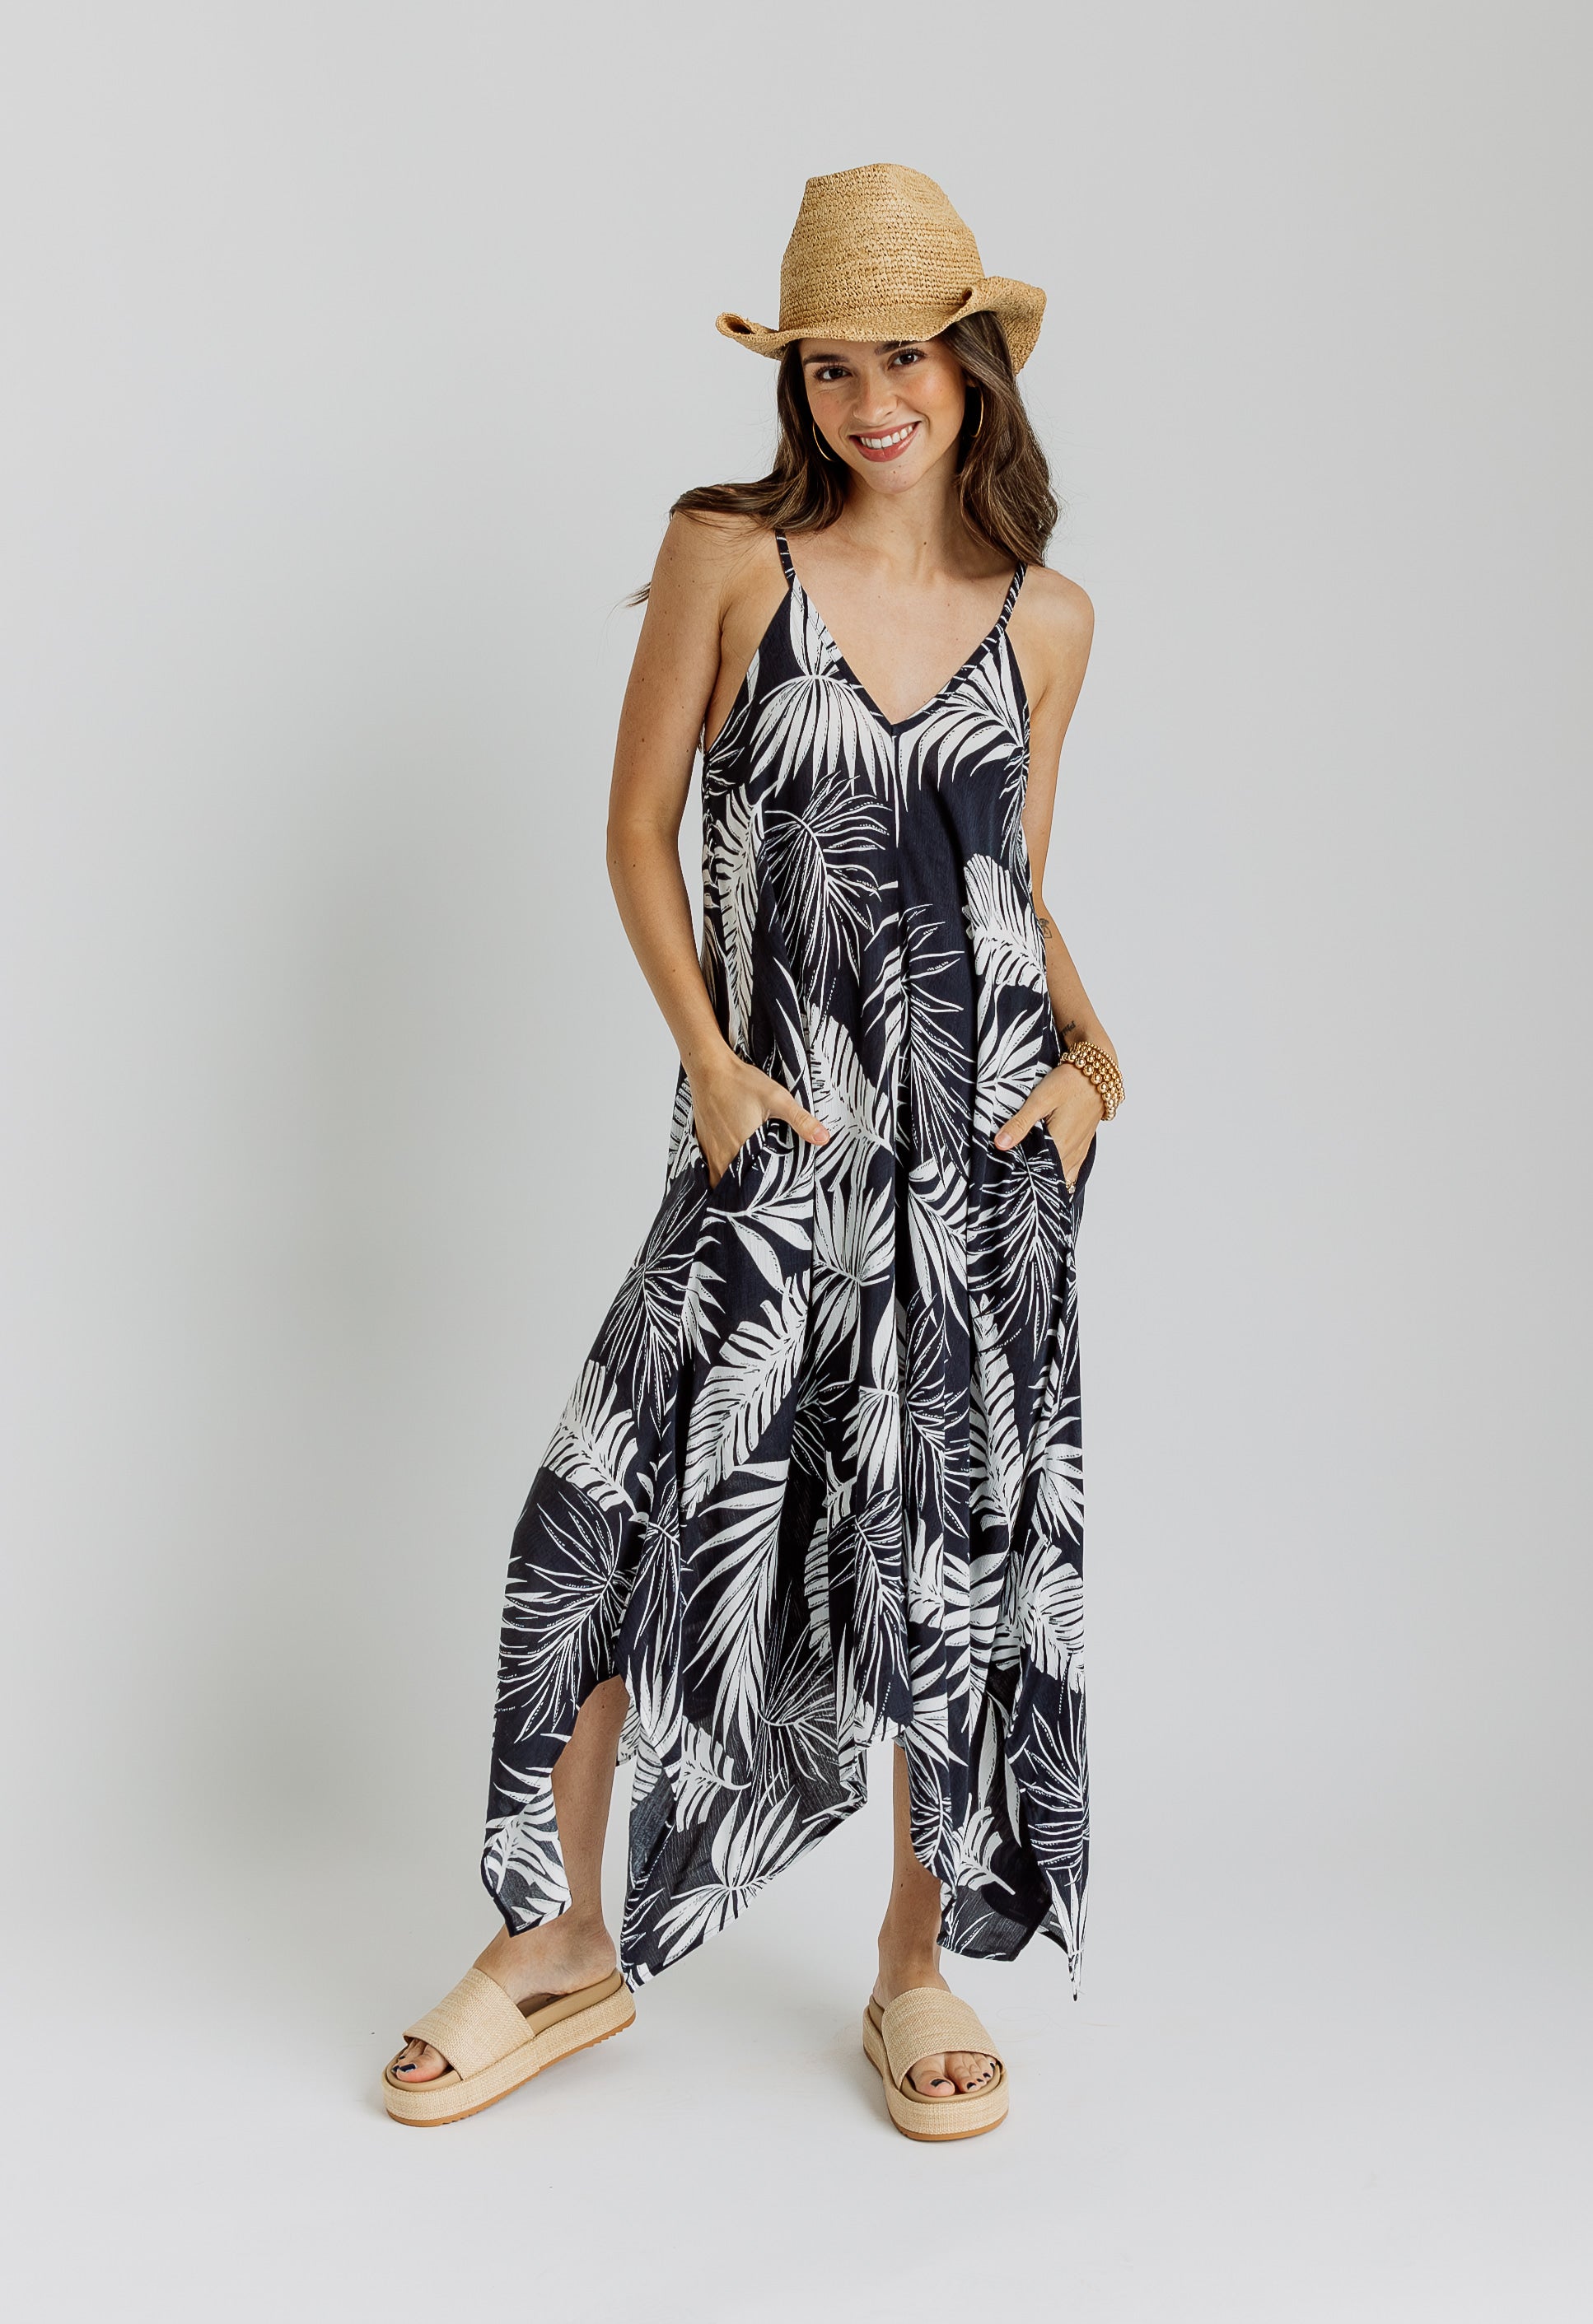 Under The Palms Dress - NAVY - willows clothing Long Dress